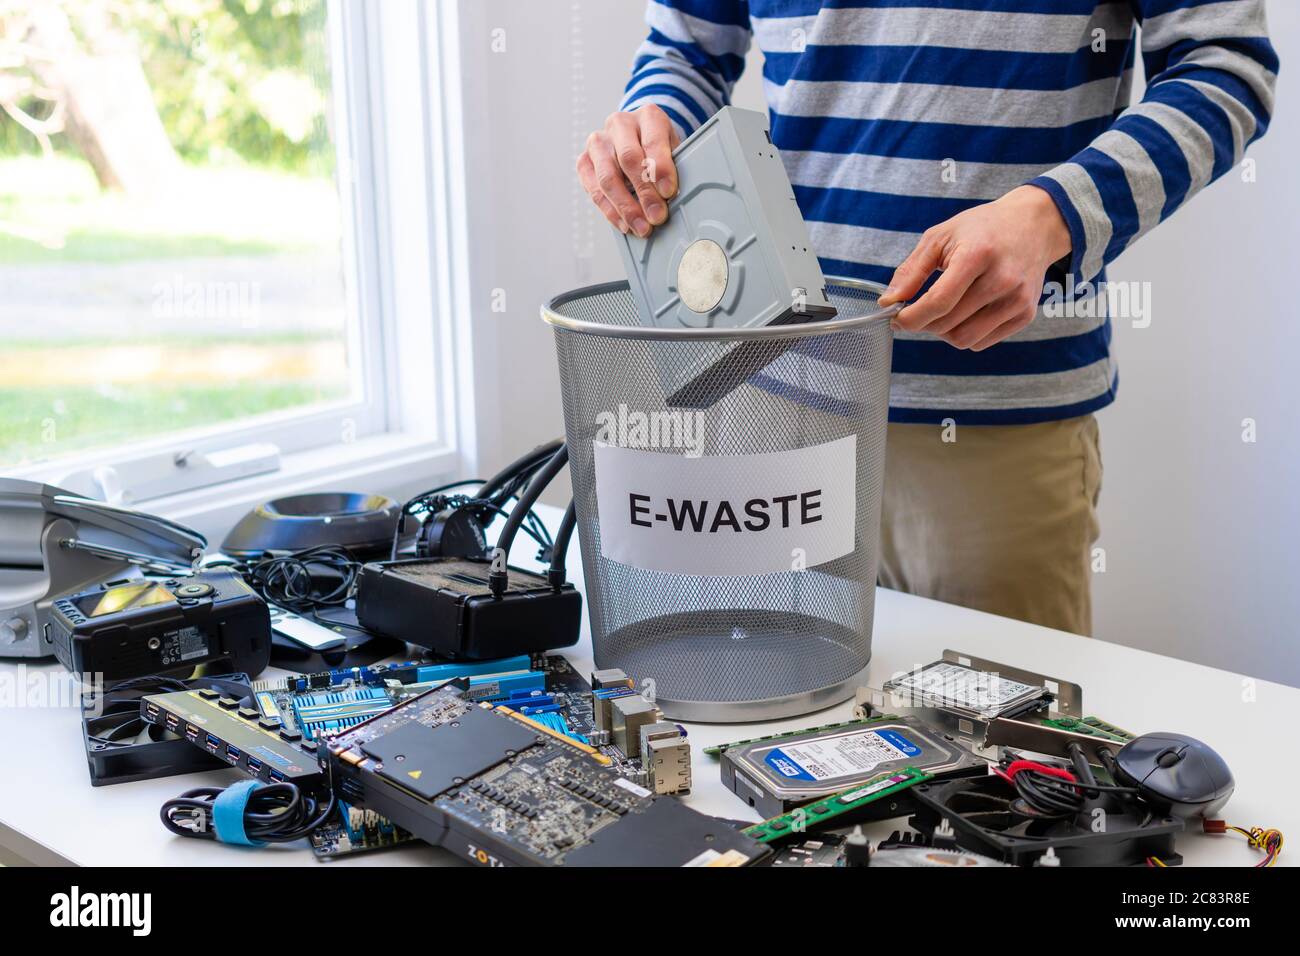 Collecting electronic waste for recycling Stock Photo